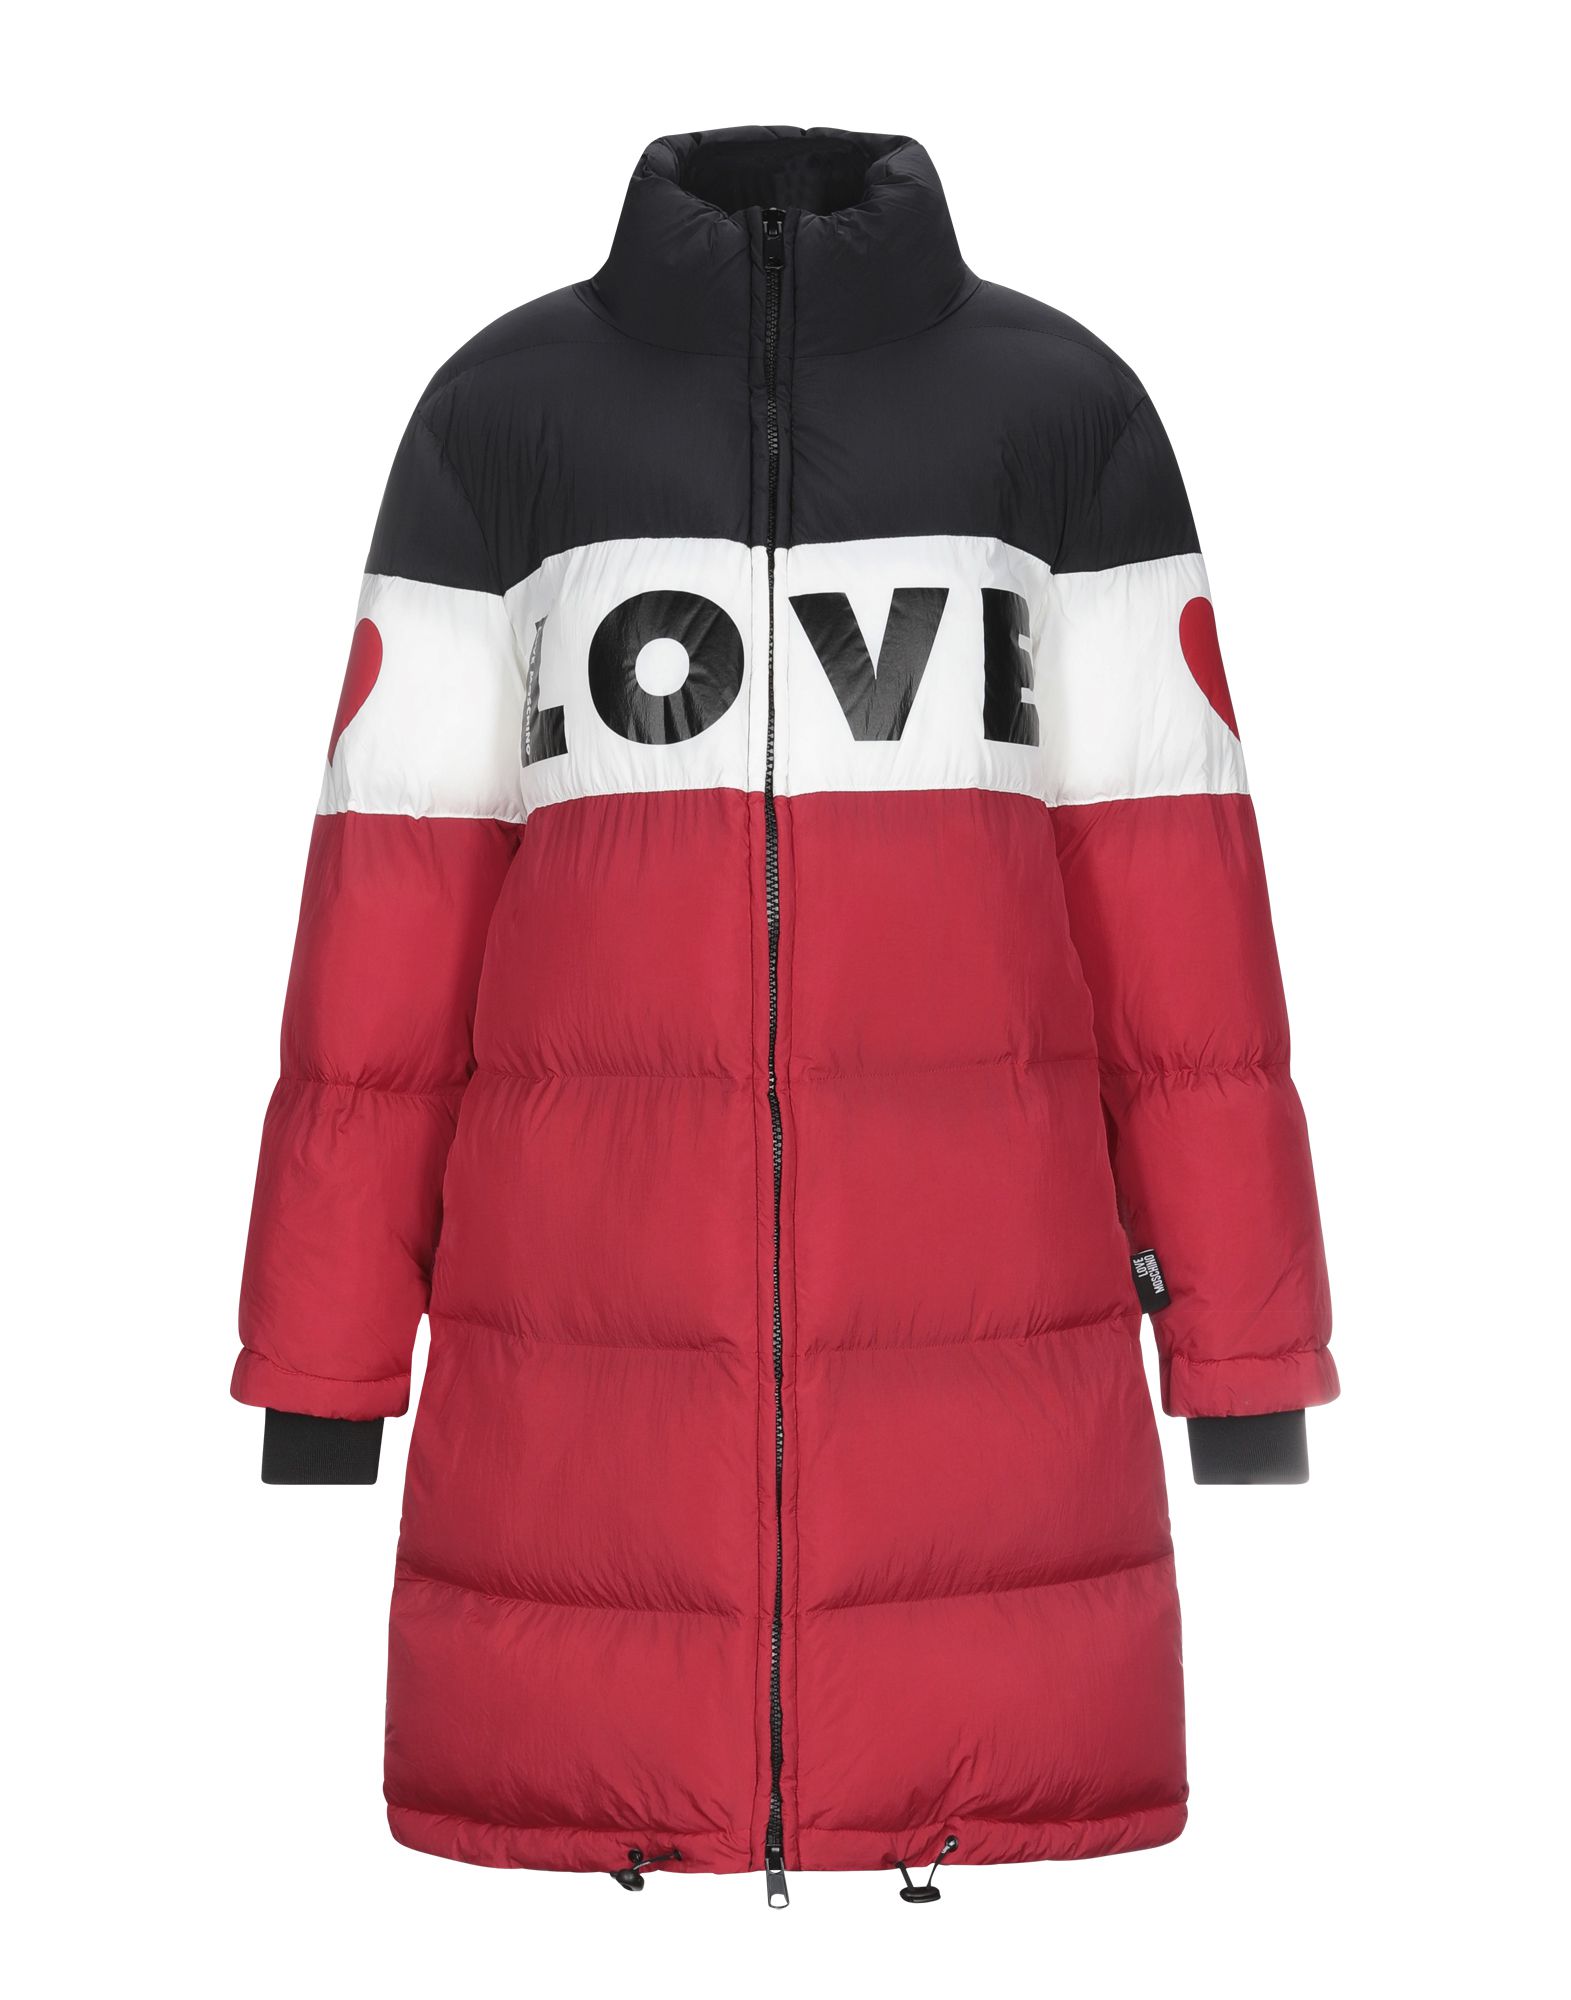 LOVE MOSCHINO Synthetic Down Jackets - Item 41988824